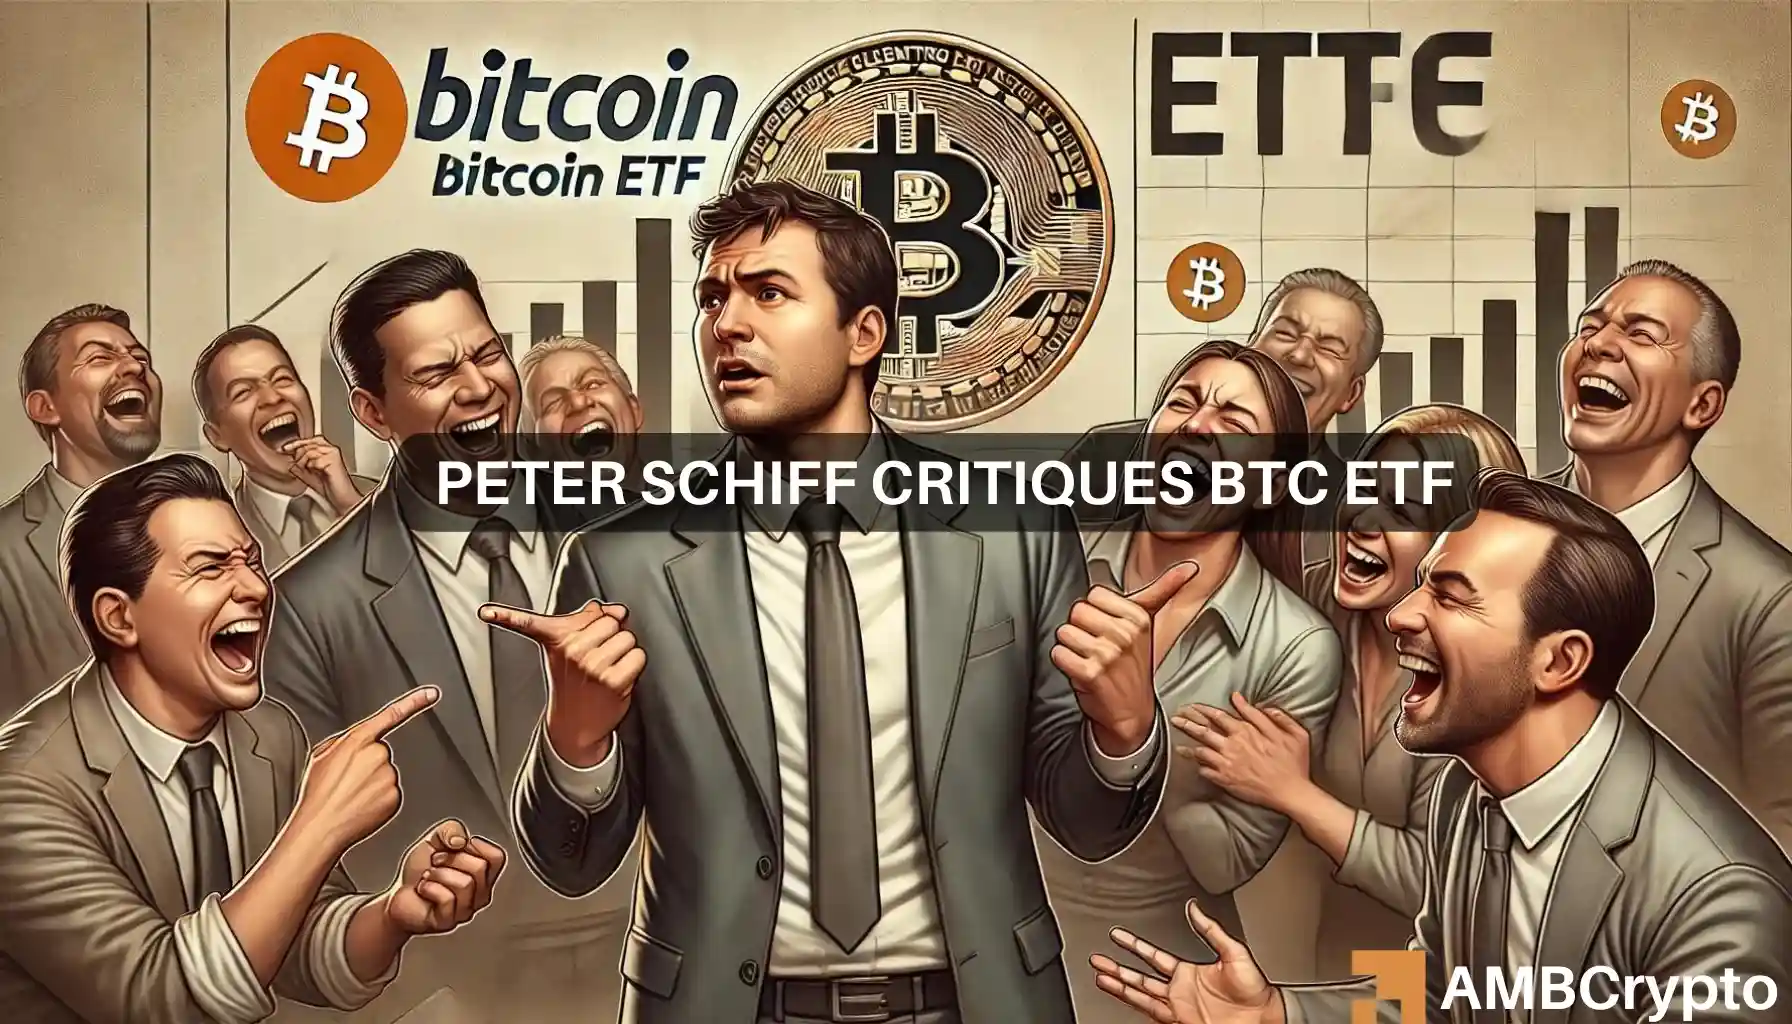 Bitcoin ETF investors are '20% worse off': Peter Schiff - Is this true?